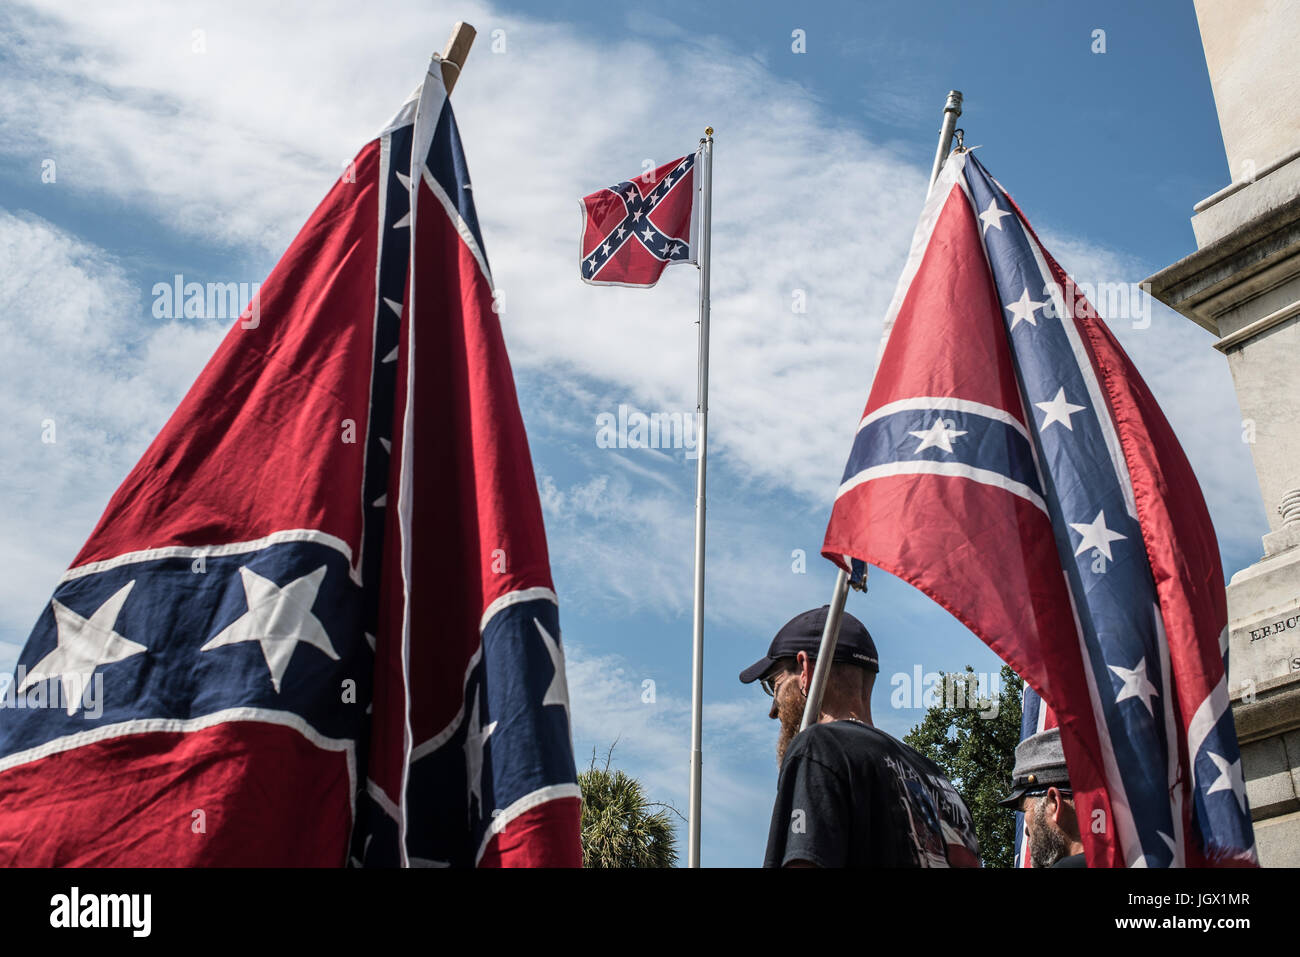 Colombia, South Carolina, USA. 10th Jul, 2017. A few dozen of Confederacy supporters displayed their loyalty to the Confederate flag during the Confederate flag raising event held by the South Carolina Secessionist Party in protest of the two year anniversary of the Confederate Battle Flag's removal from the South Carolina State House Grounds in 2015. The flag which was hoisted on a portable flag pole at 10 a.m. was to be removed from the South Carolina State House Grounds at 5 p.m. Credit: Crush Rush/Alamy Live News Stock Photo